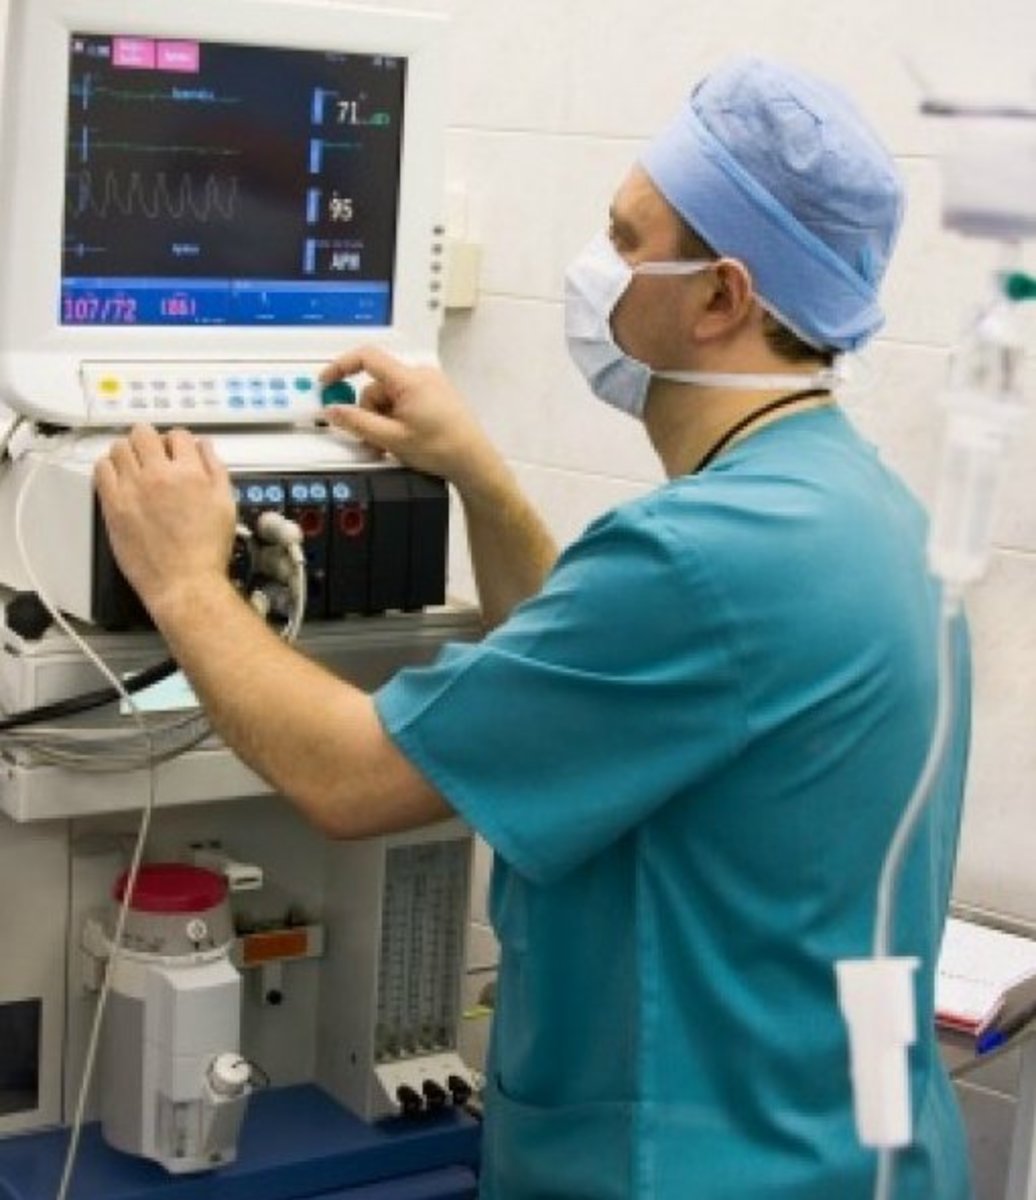 Your anesthesiologist monitors vital signs and adjusts anesthetic throughout your surgery.